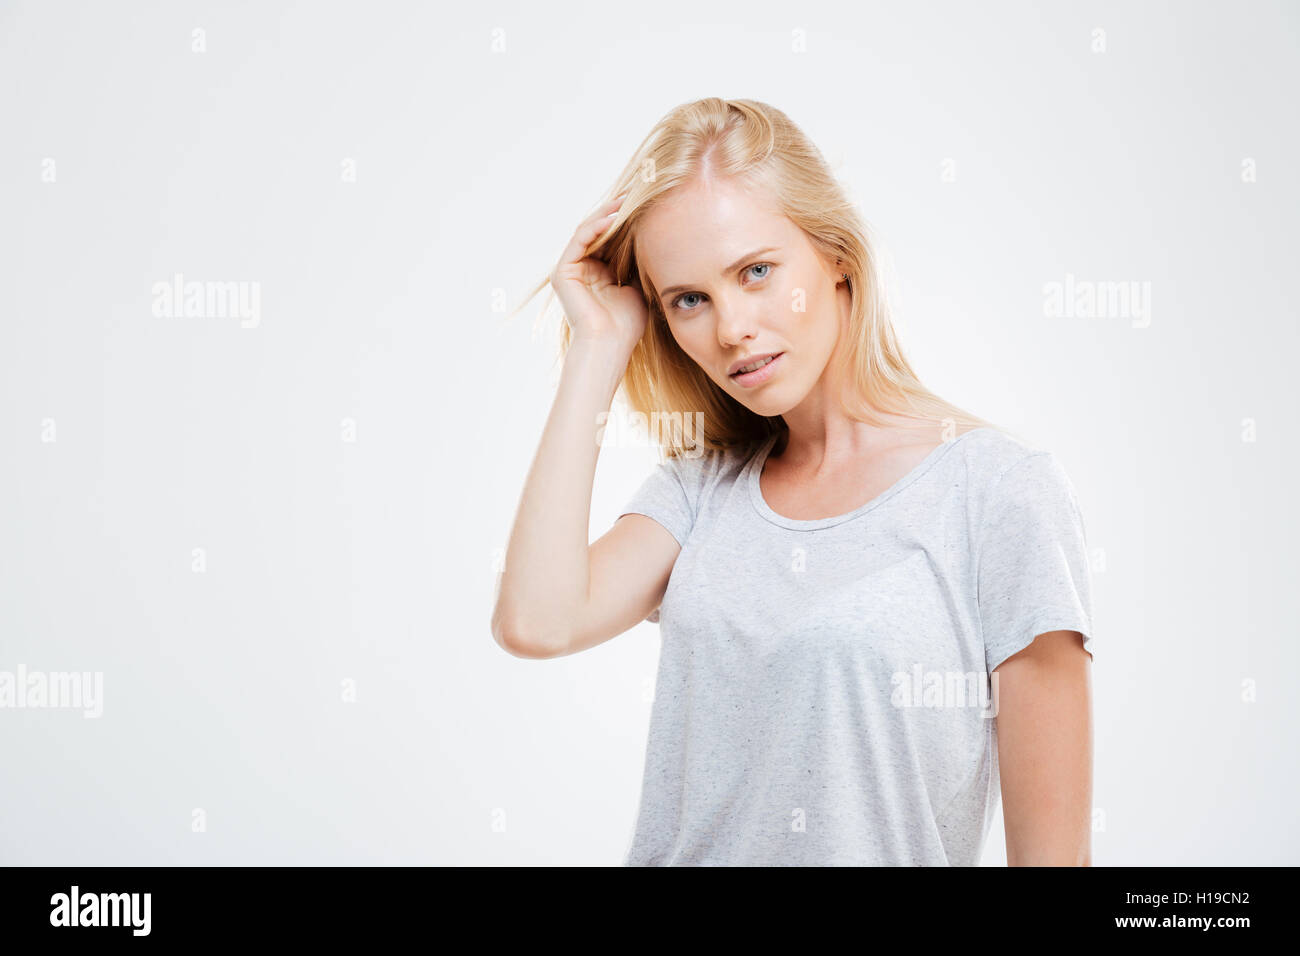 Portrait of confident beautiful young woman with blonde hair over white background Stock Photo